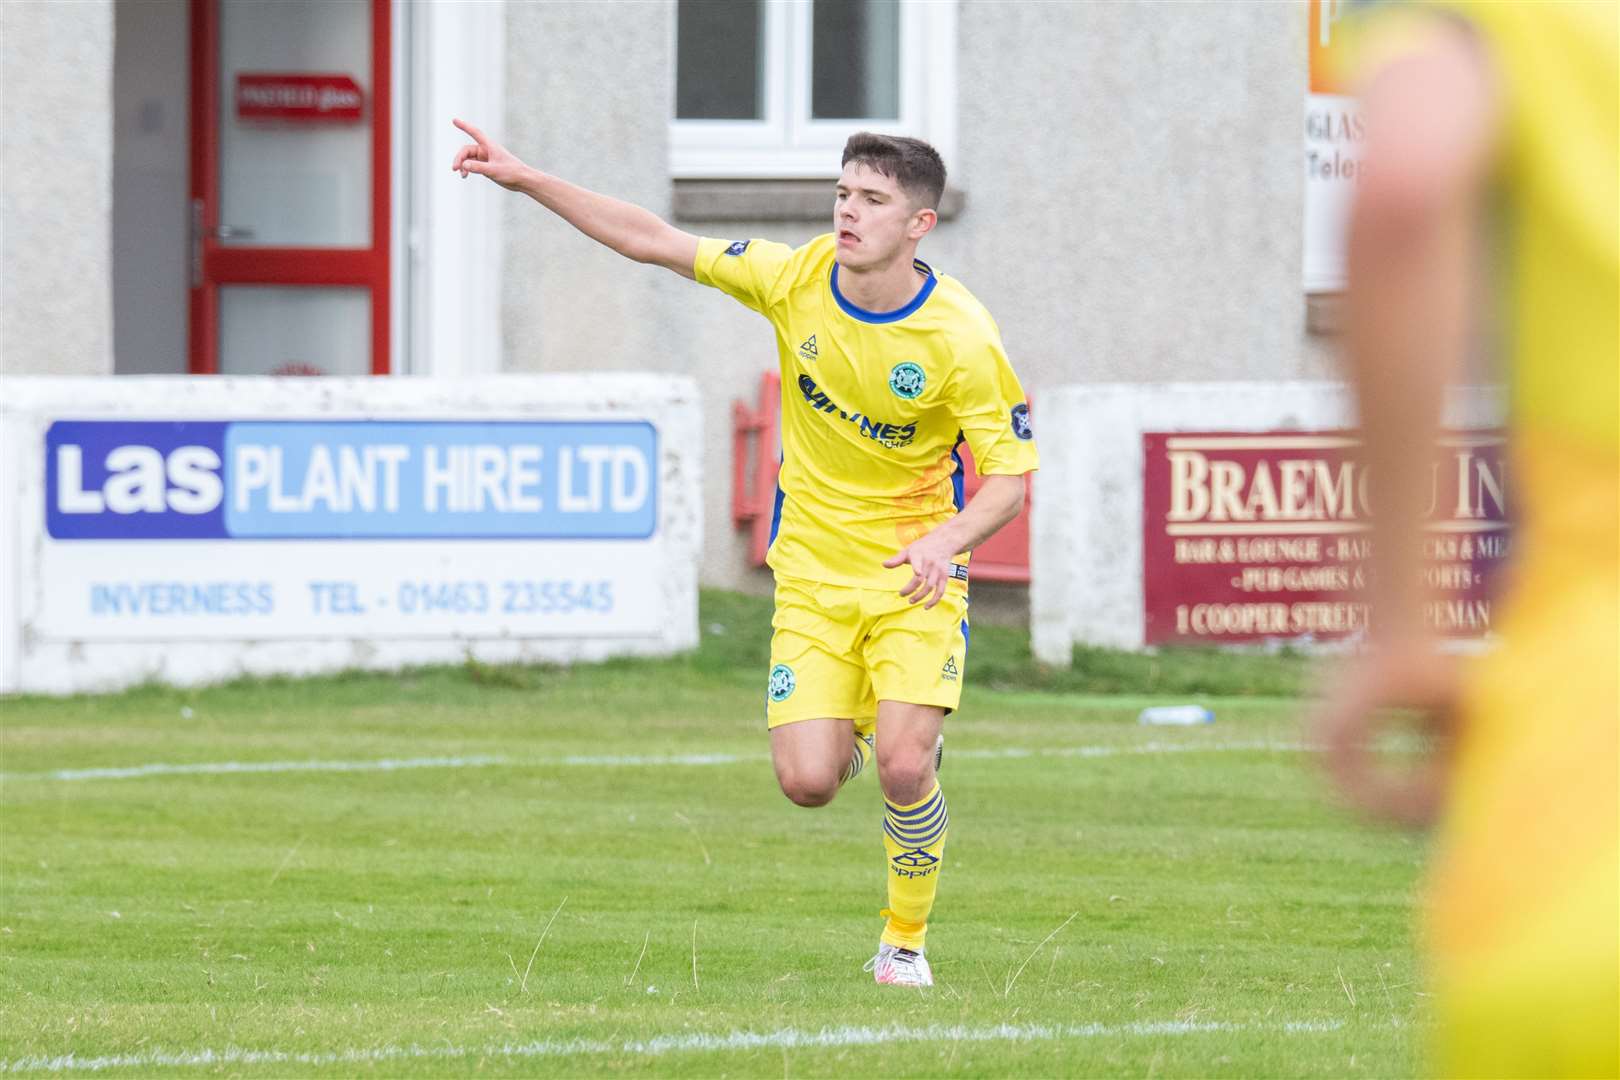 Buckie's Marcus Goodall wheels away to celebrate his second goal of the afternoon. ..Lossiemouth FC (1) vs Buckie Thistle (2) - Scottish Cup 2022/23 - Grant Park, Lossiemouth 17/09/2022...Picture: Daniel Forsyth..